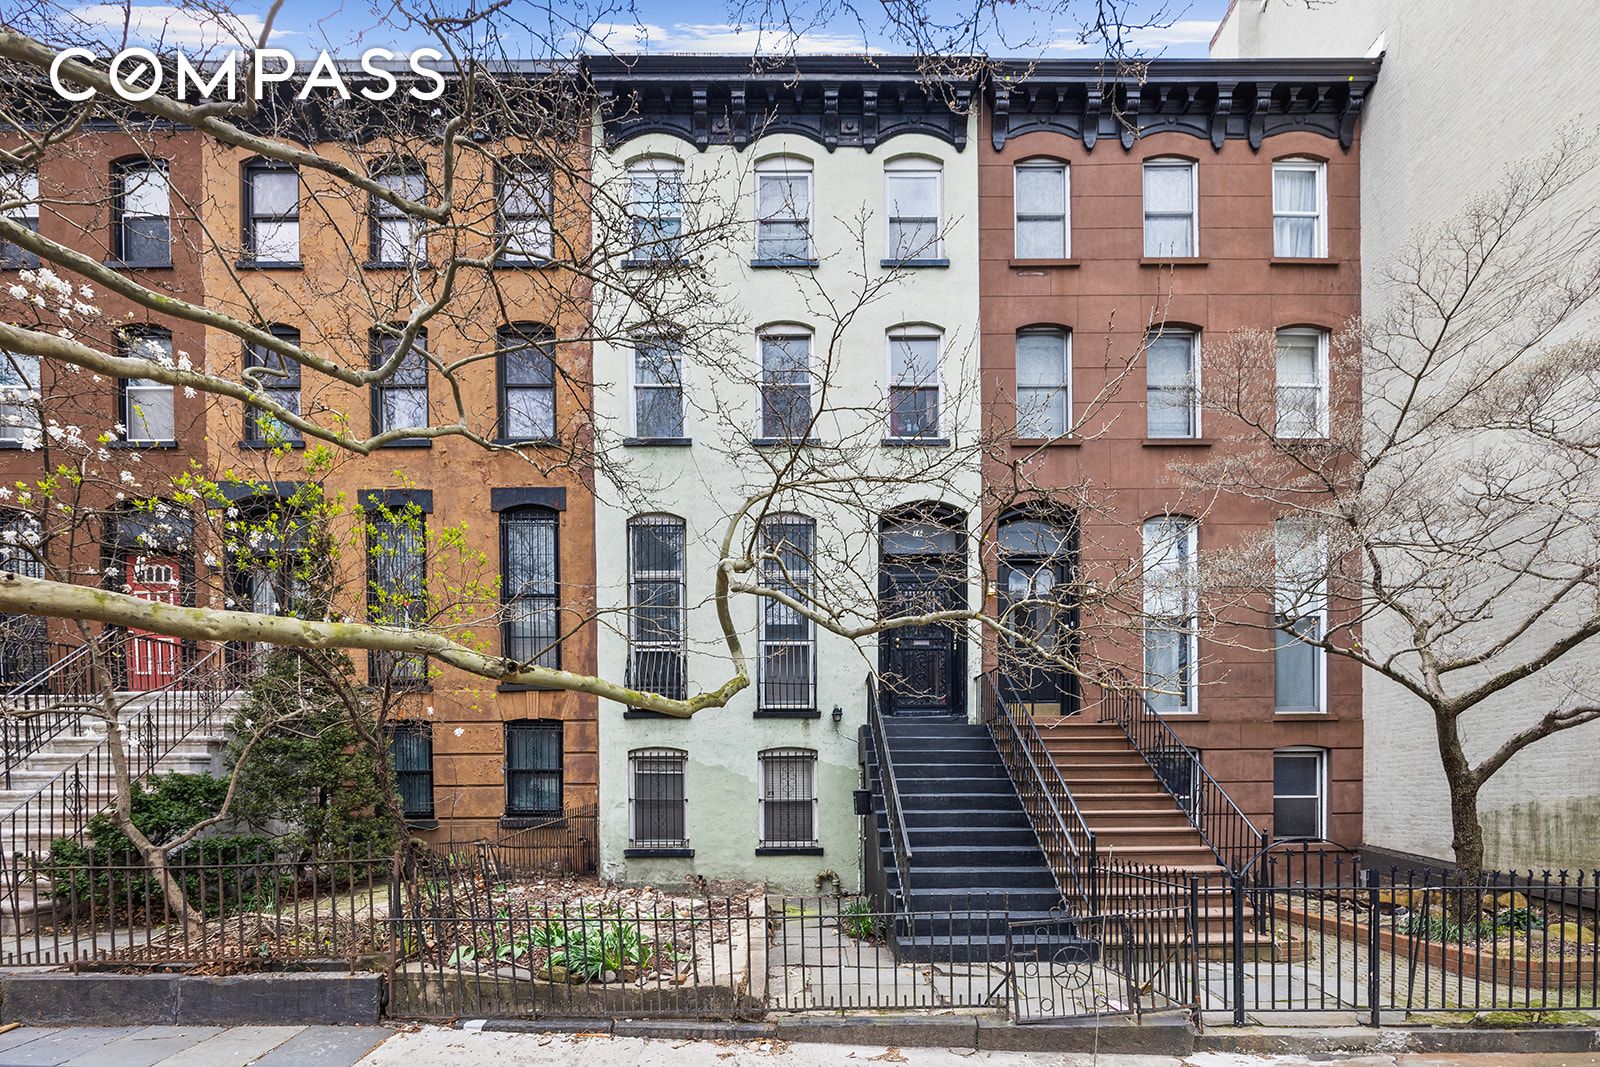 16 Park Place, Park Slope, Brooklyn, New York - 5 Bedrooms  
3 Bathrooms  
12 Rooms - 